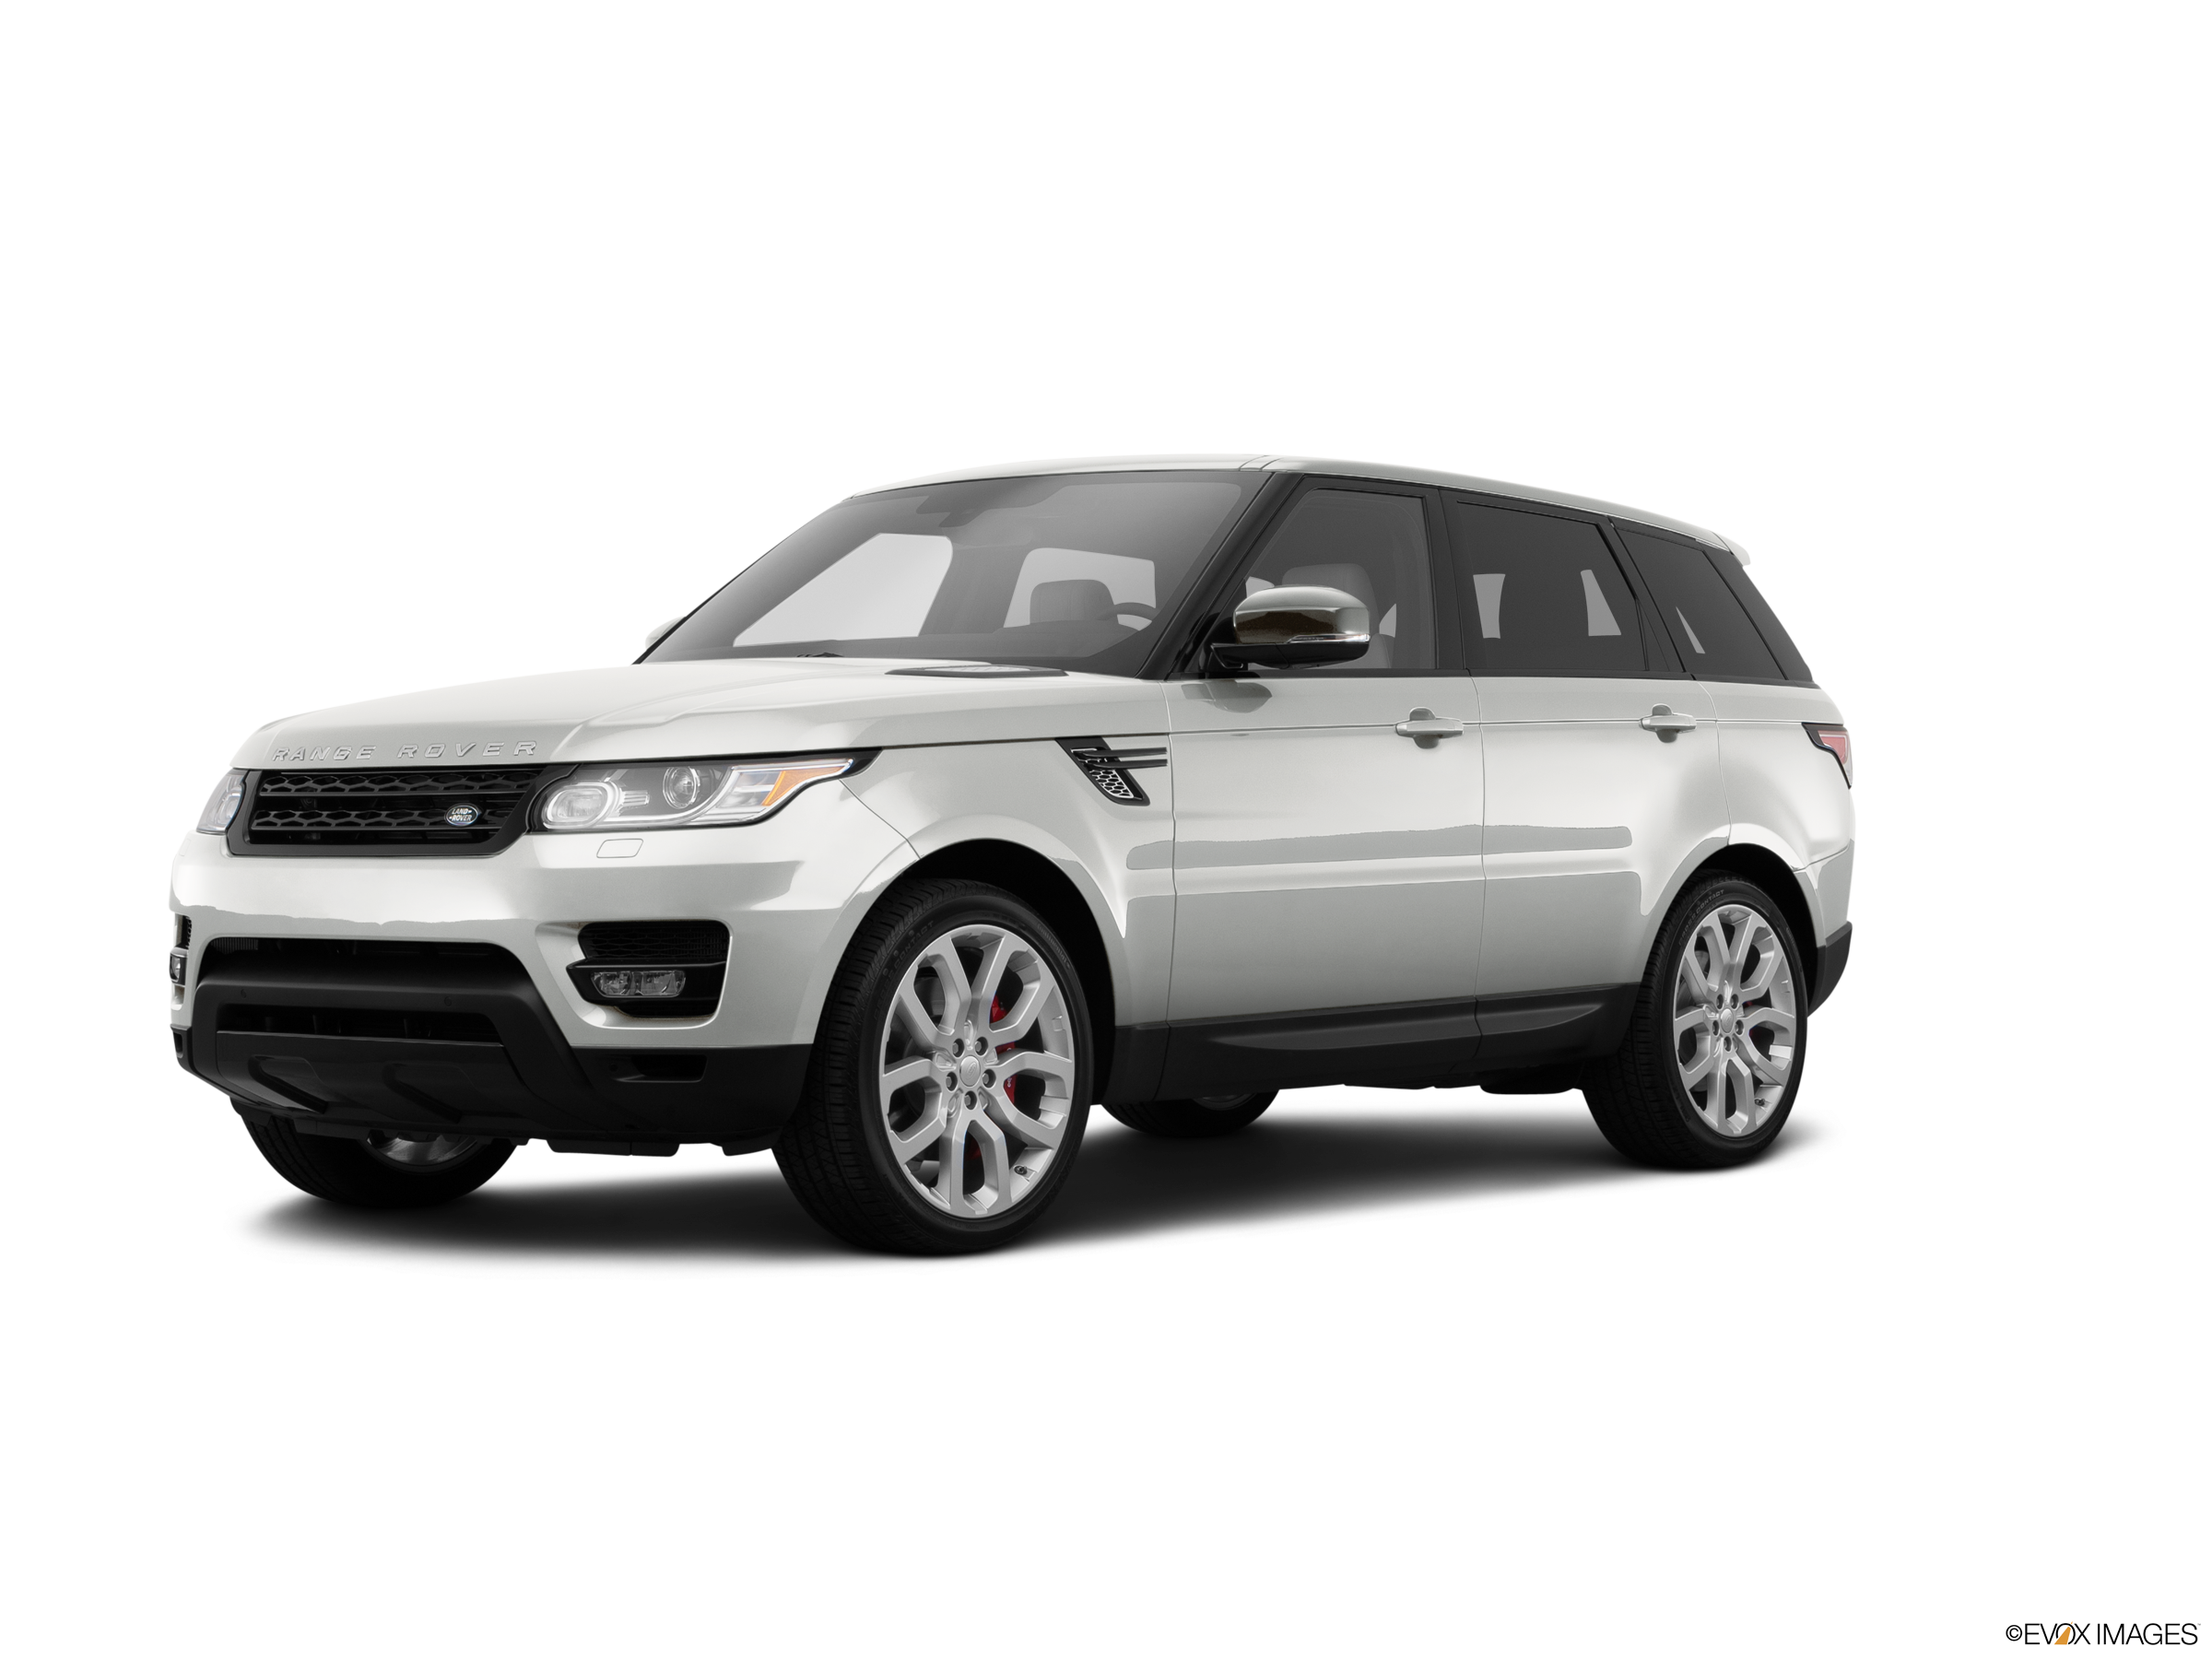 Melodieus Van God was Used 2014 Land Rover Range Rover Sport Autobiography Sport Utility 4D Prices  | Kelley Blue Book